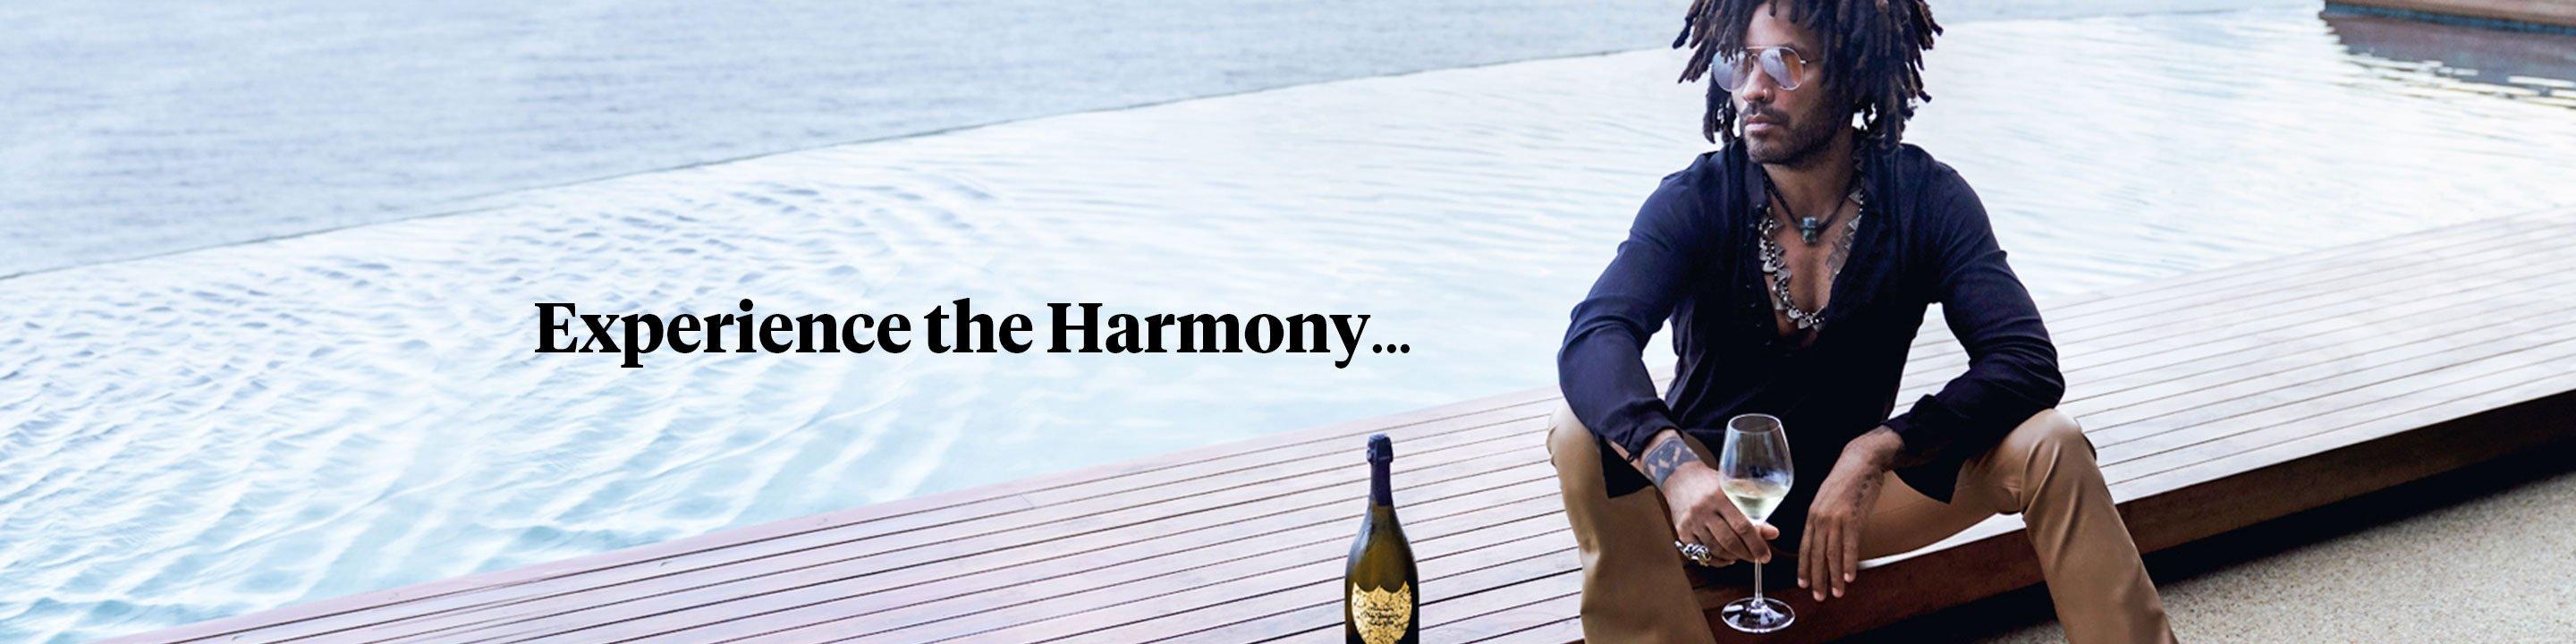 Dom Pérignon has a creative ambition: the quest for harmony as a source of emotion. All creative processes have their limitations. For Dom Pérignon, it’s the vintage - an absolute commitment to representing the character of the harvest for a single year, whatever challenges it brings, even going as far as not declaring a vintage.